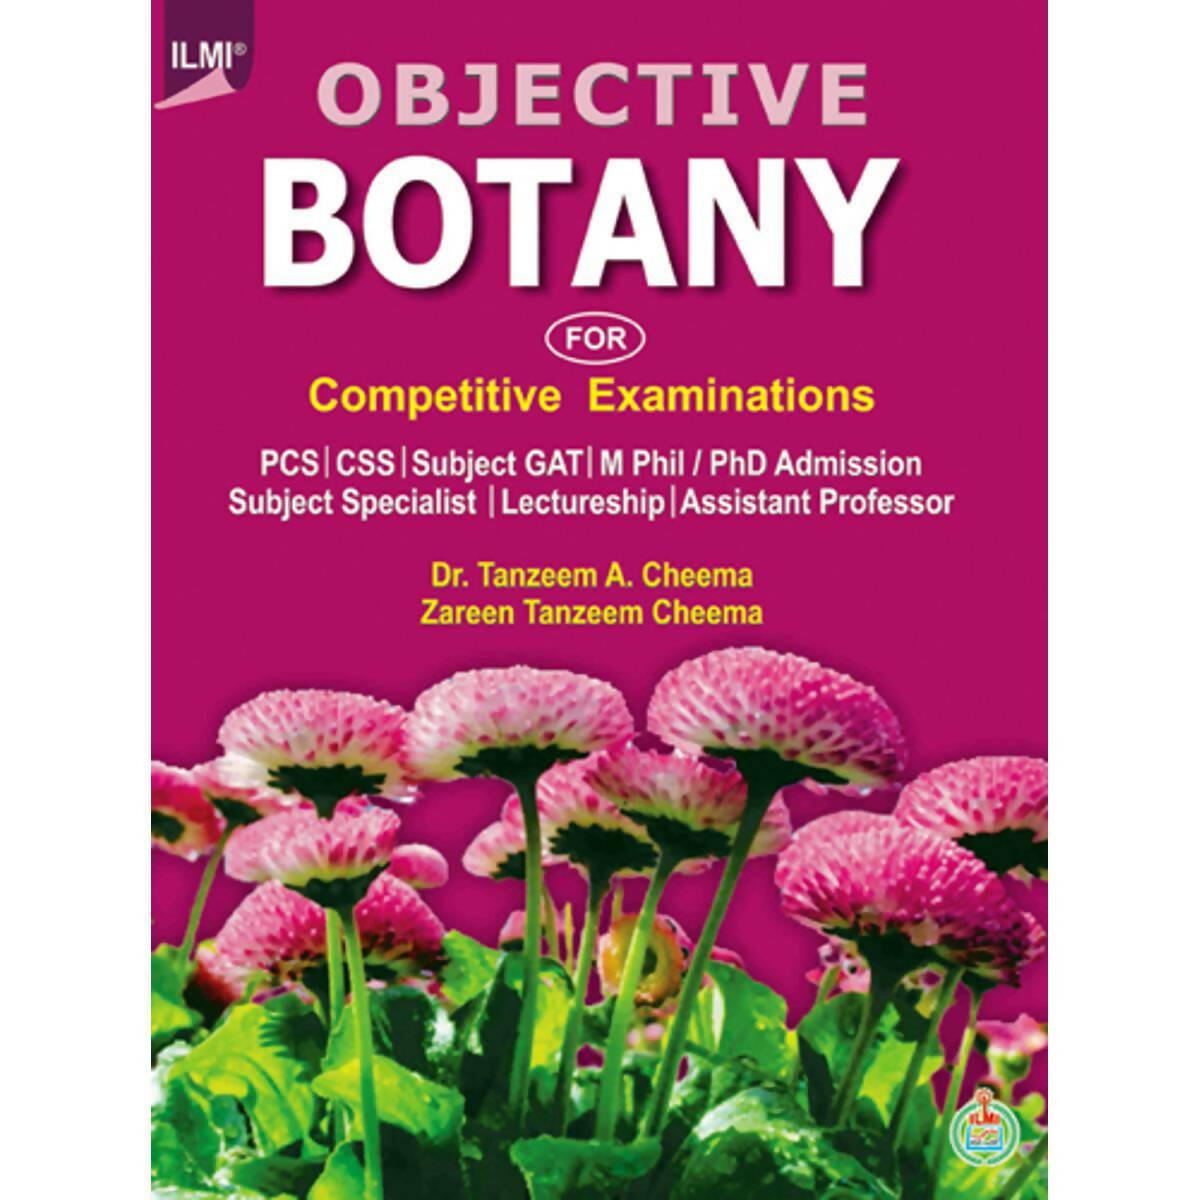 ILMI Objective BOTANY for Competitive Examinations Guide - ValueBox